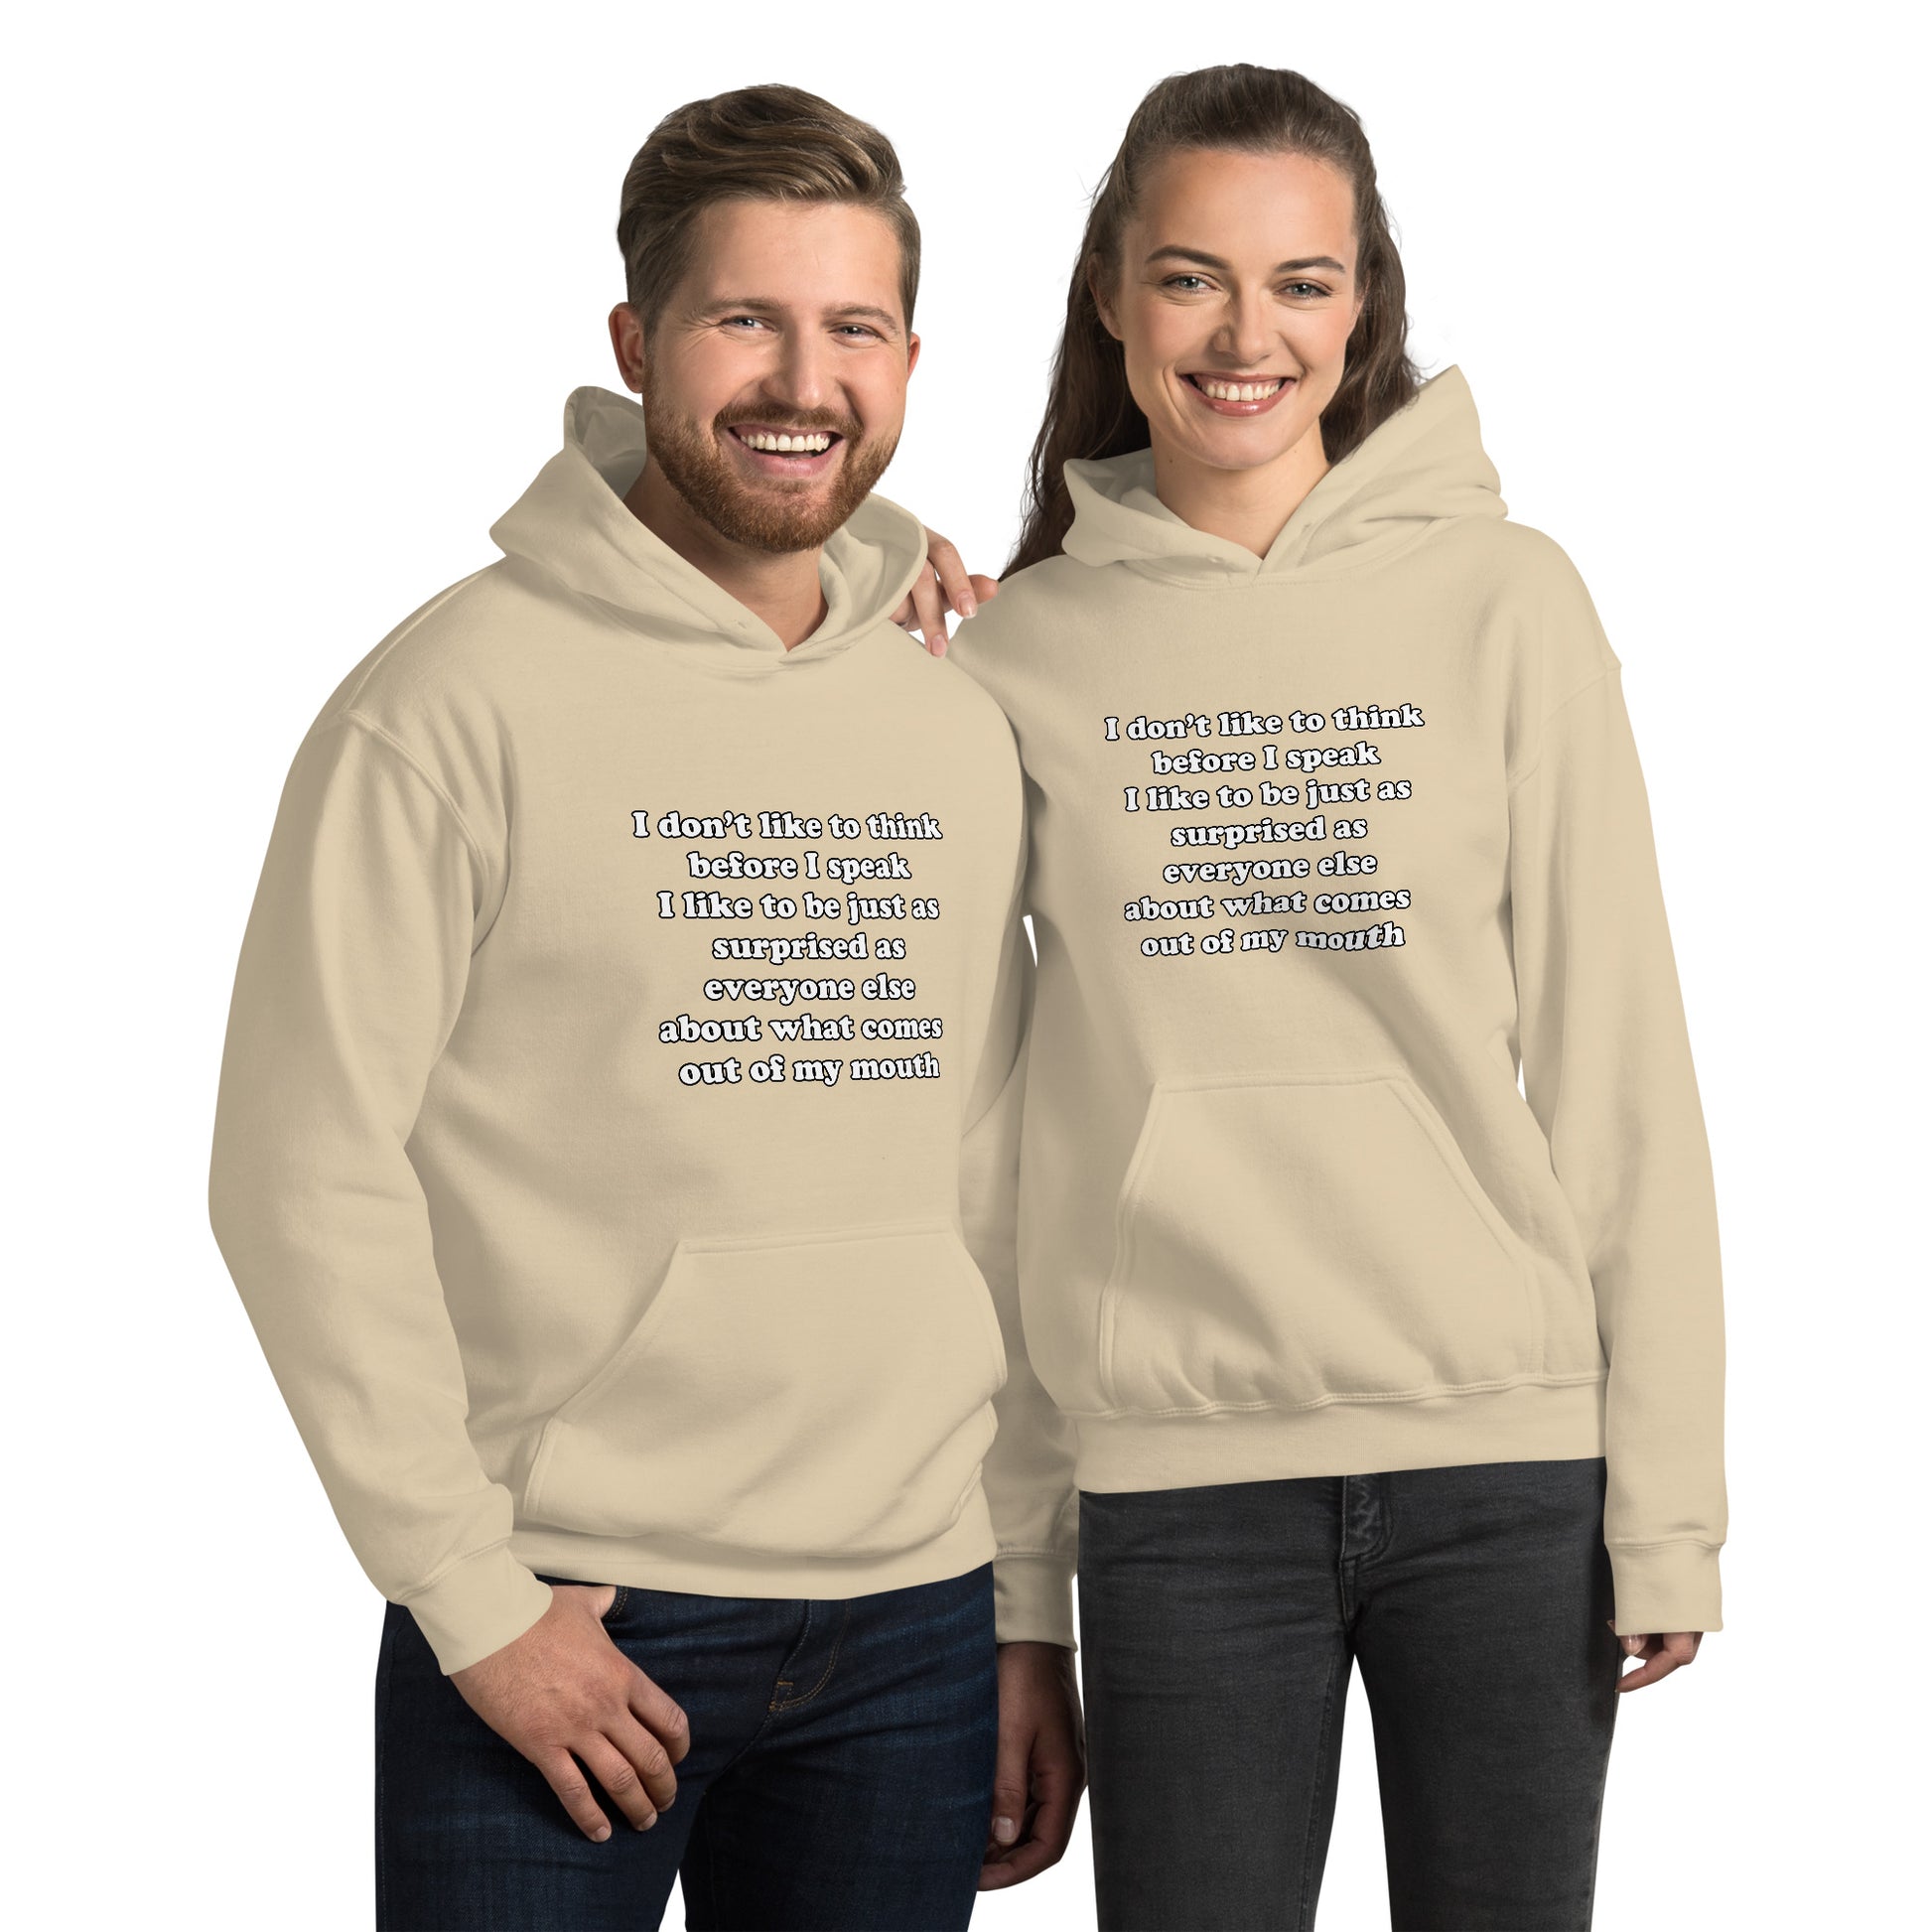 Man and woman with sand hoodie with text “I don't think before I speak Just as serprised as everyone about what comes out of my mouth"